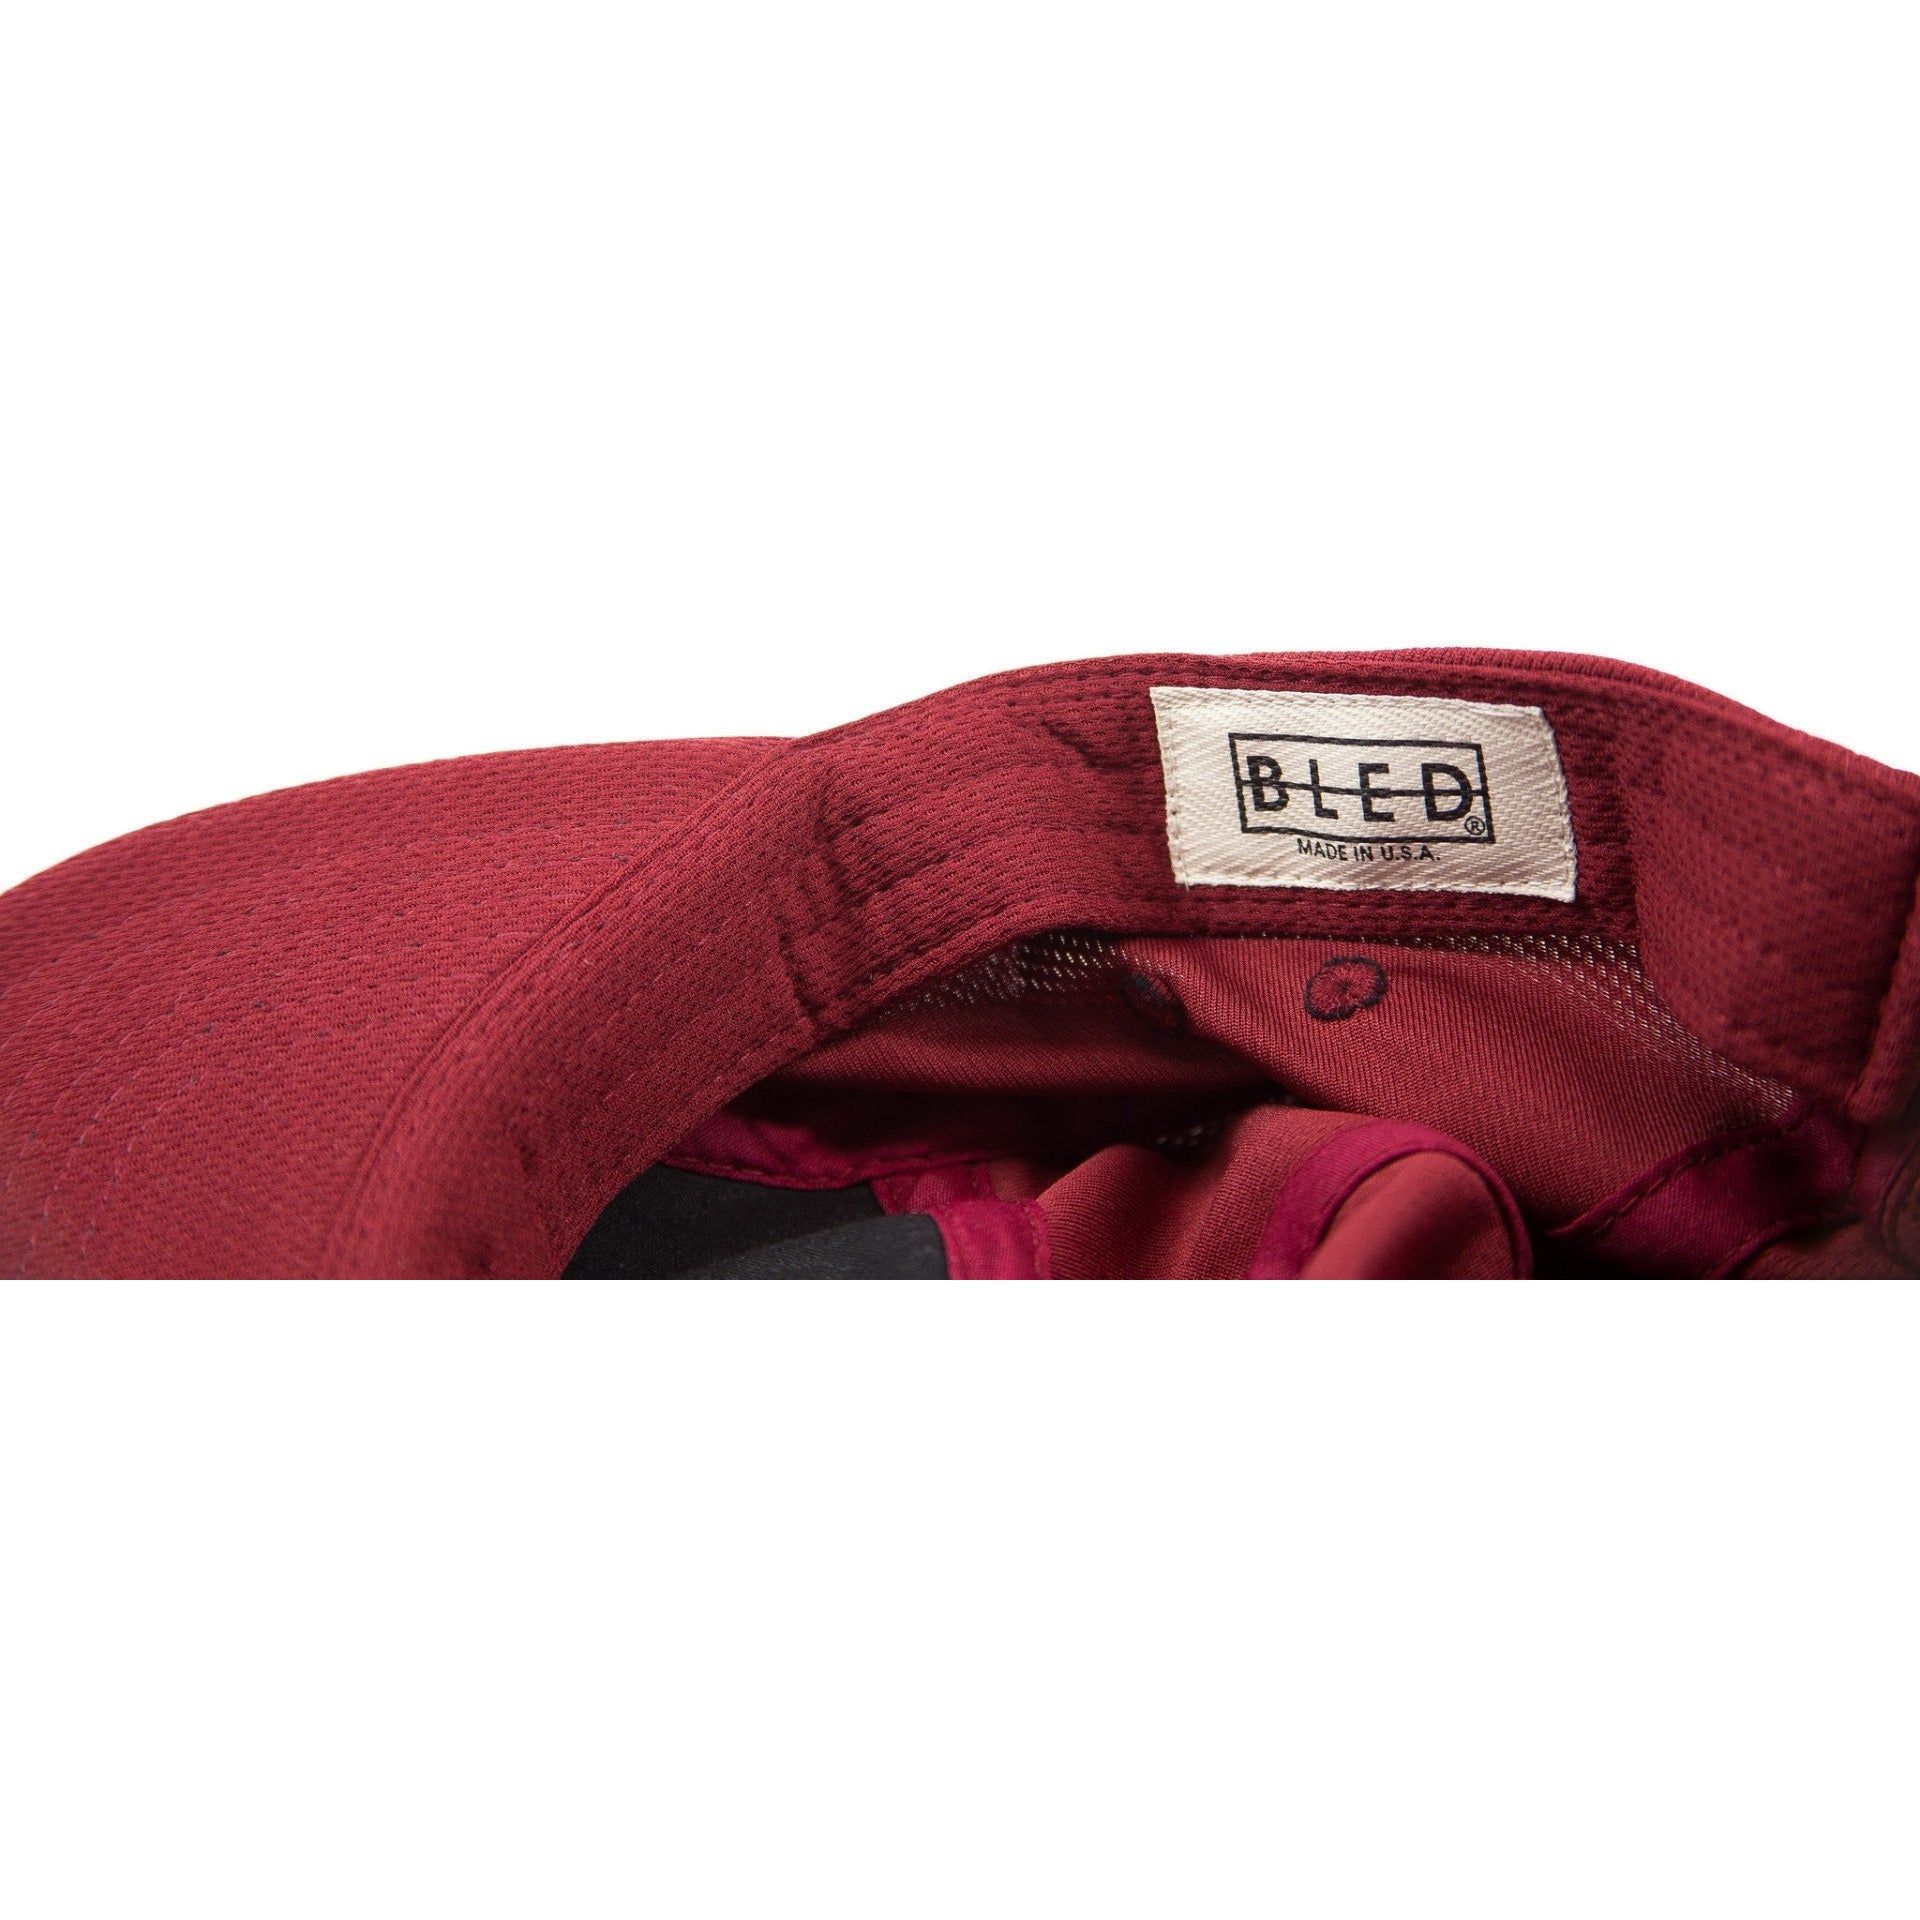 5-panel unconstructed mesh polyester burgundy hat featuring BLED letter logo felt patch on the front and BLED logo embroidered on the back with adjustable strap, skateboards, hype, skate, streetwear